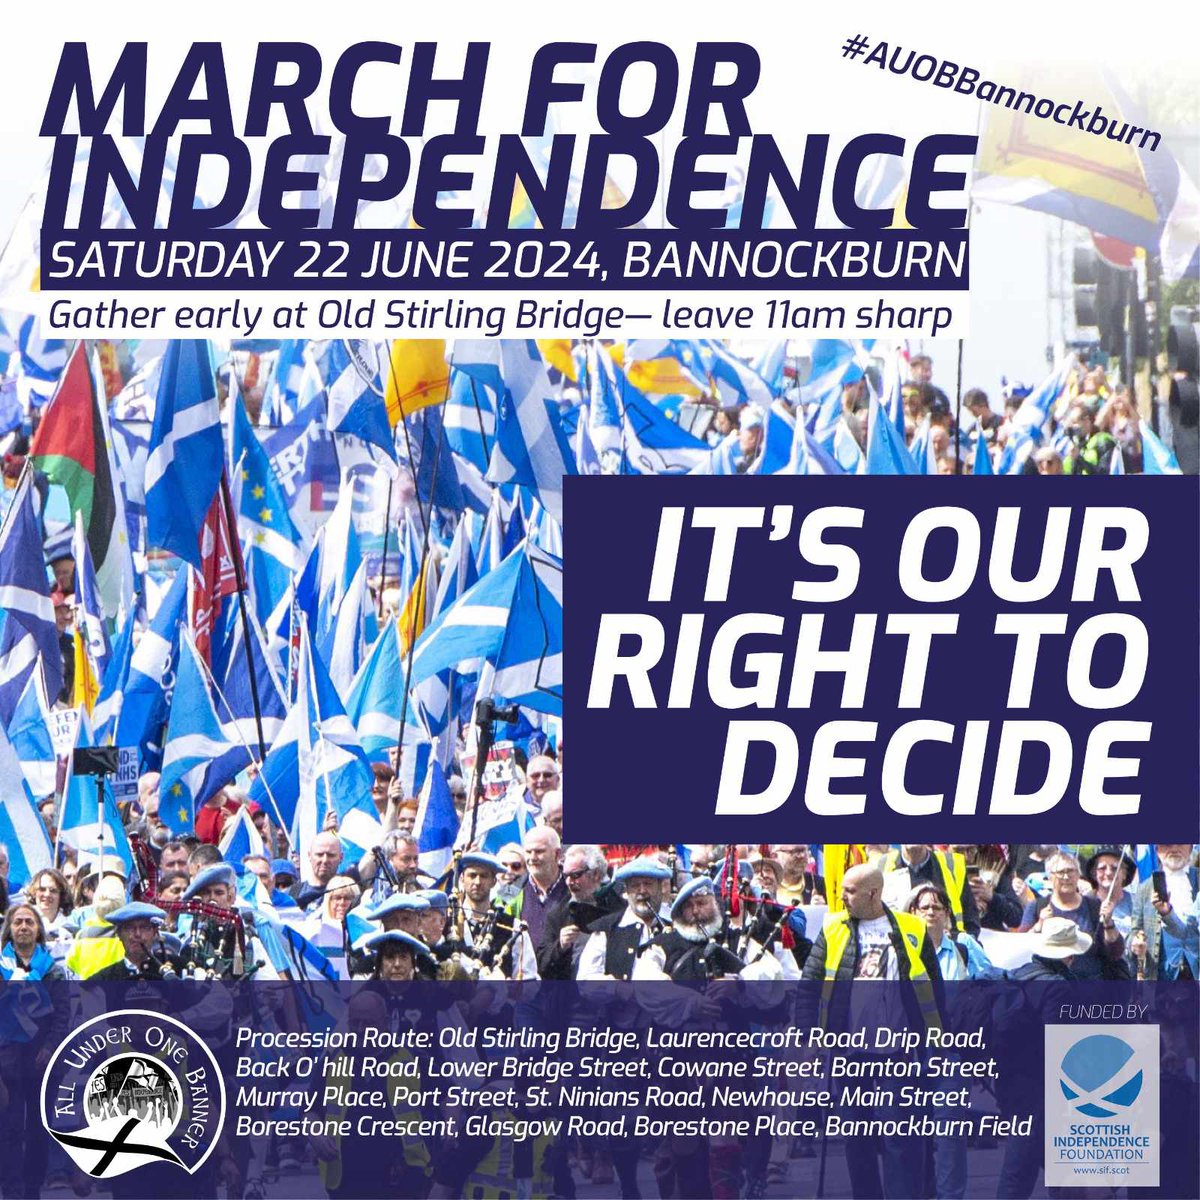 MARCH FOR INDEPENDENCE - BANNOCKBURN 🏴󠁧󠁢󠁳󠁣󠁴󠁿 SATURDAY 22 JUNE 2024 OLD STIRLING BRIDGE TO BANNOCKBURN FIELD GATHER EARLY, LEAVE 11.00am SHARP MAKE SURE TO ATTEND THE NATIONAL DEMONSTRATION FOR SELF DETERMINATION 🏴󠁧󠁢󠁳󠁣󠁴󠁿 #AUOBBannockburn Facebook event page 👇🏼 facebook.com/share/jbZB4MBf…